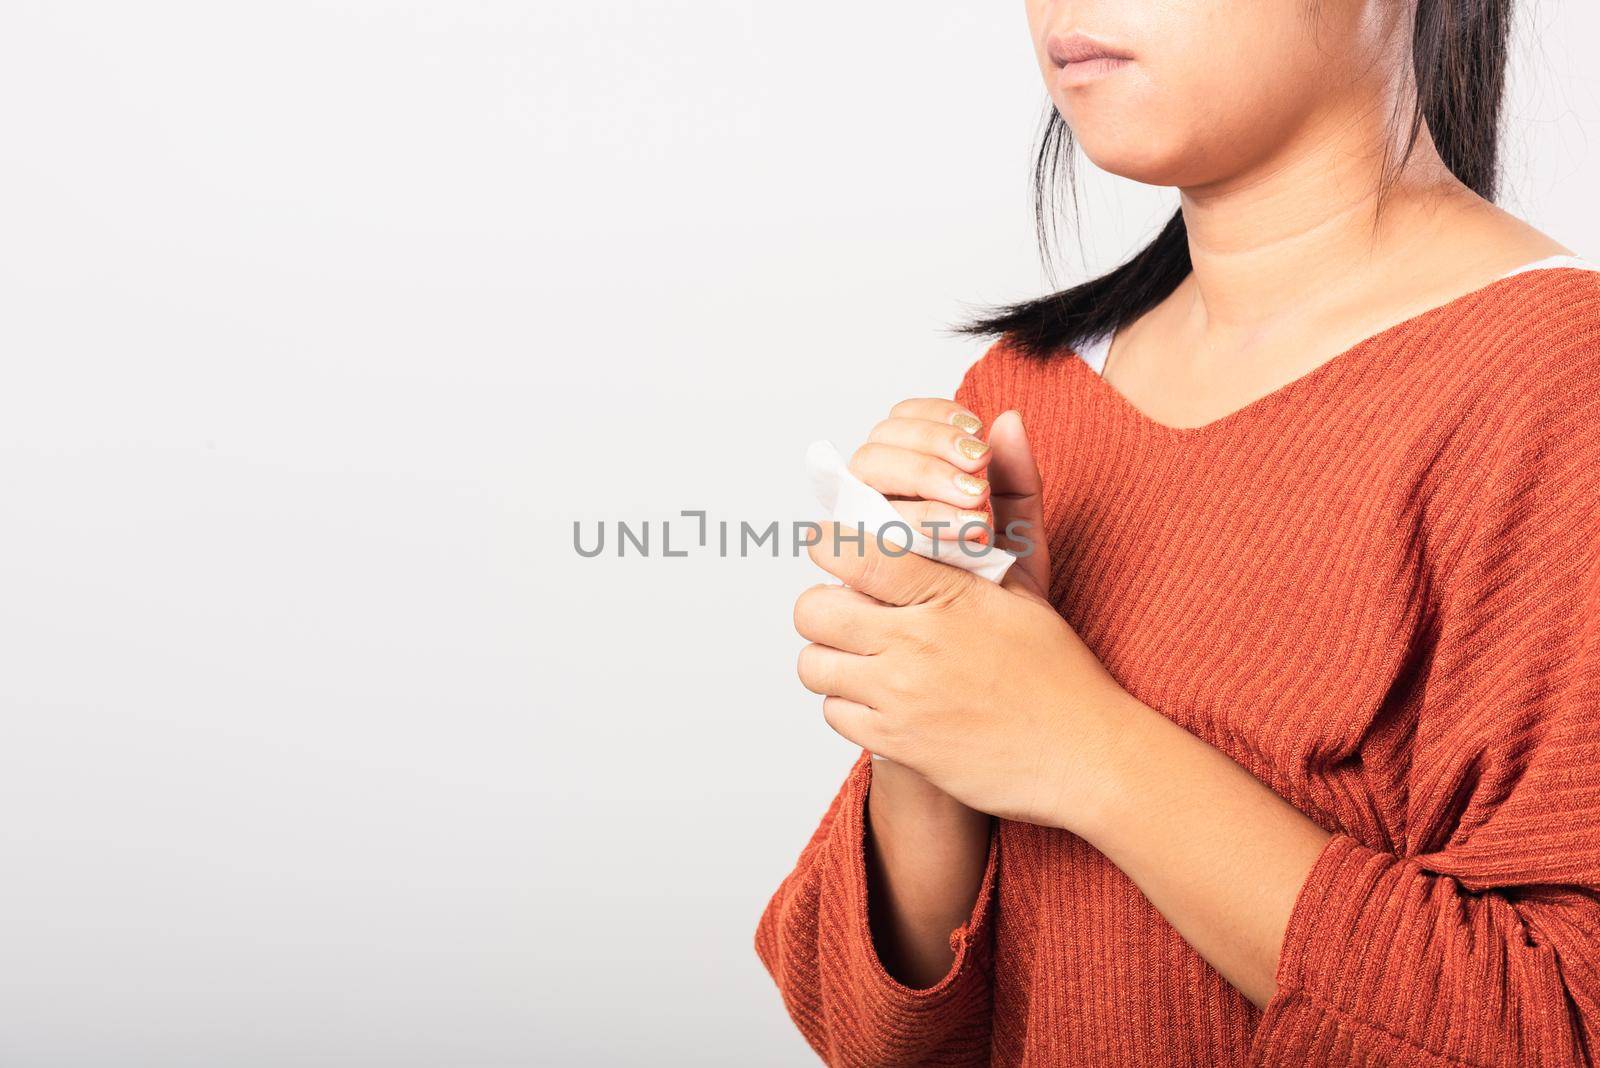 woman she using wet tissue paper wipe cleaning her hands by Sorapop